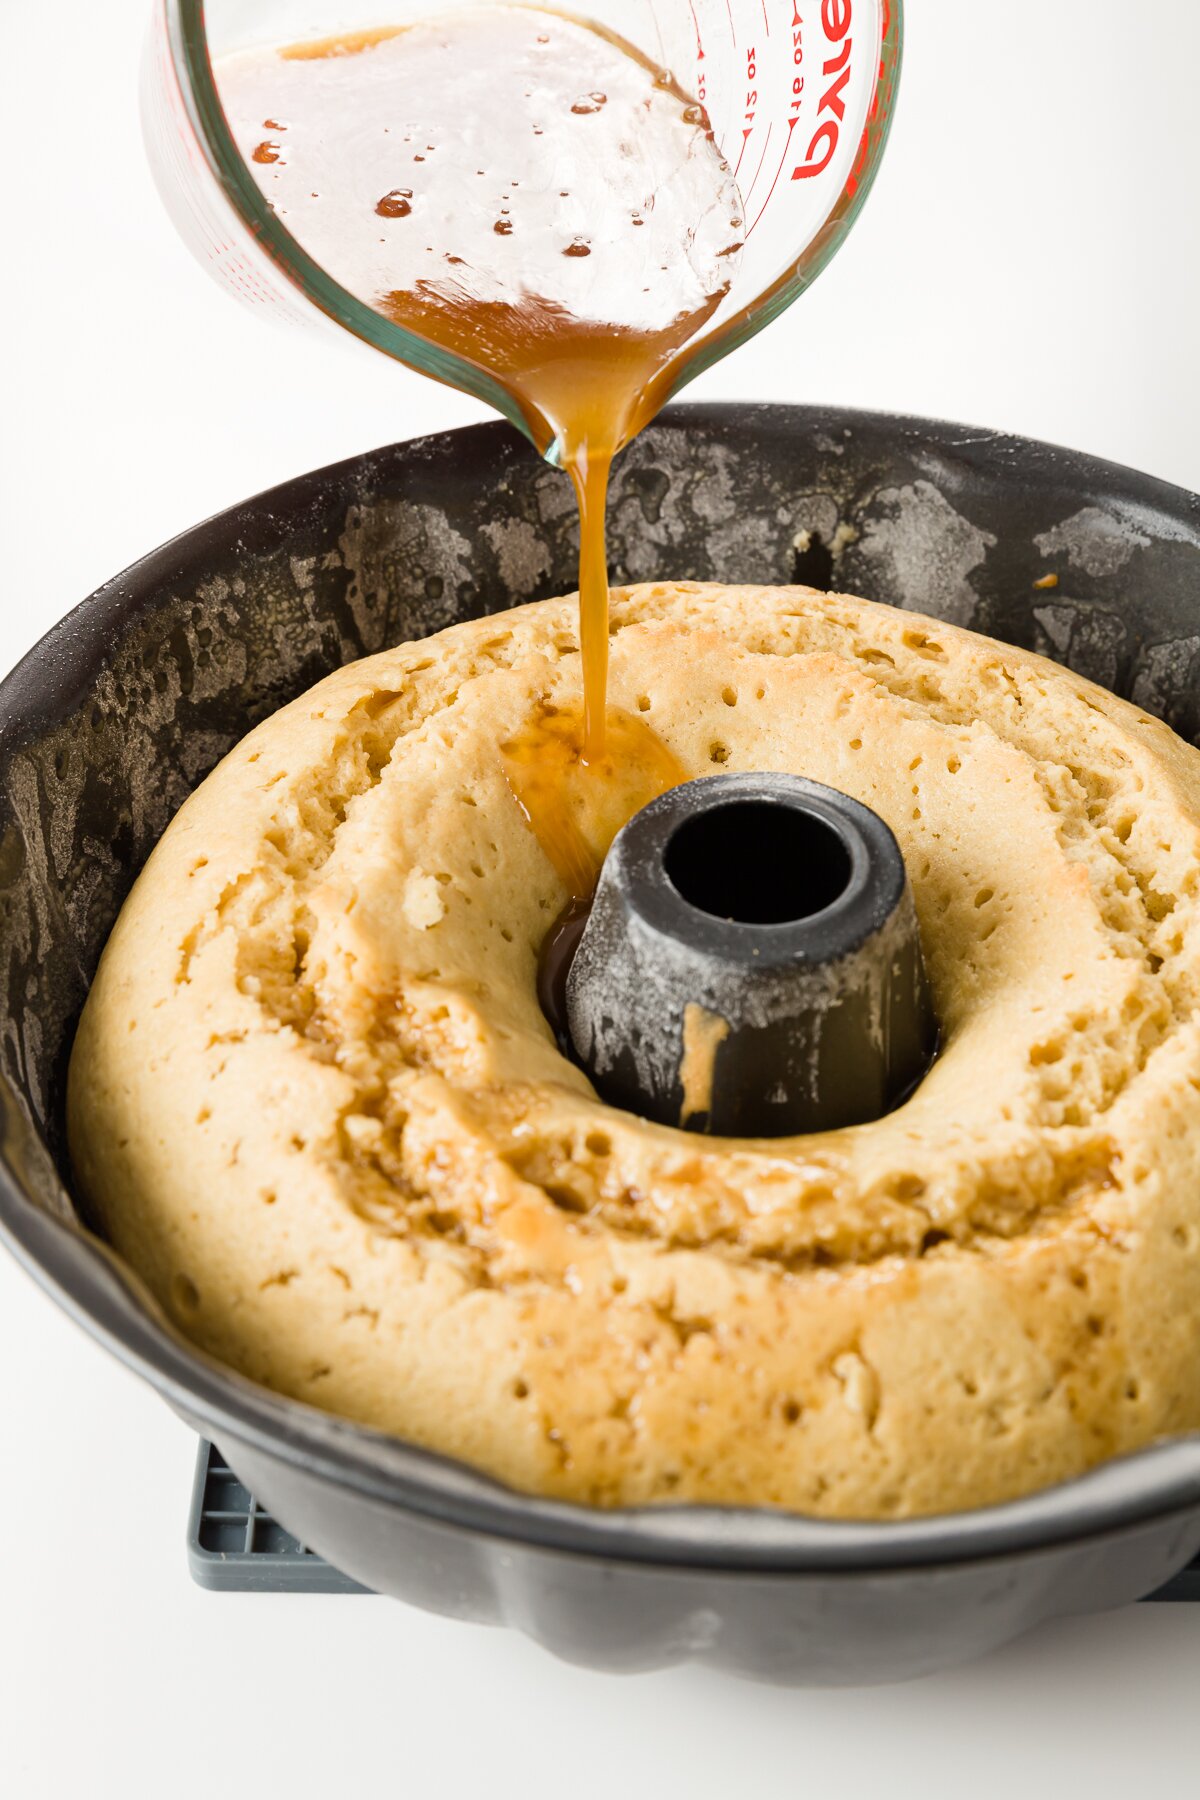 medium shot of Stef pouring rum syrup into the cake still in the Bundt pan